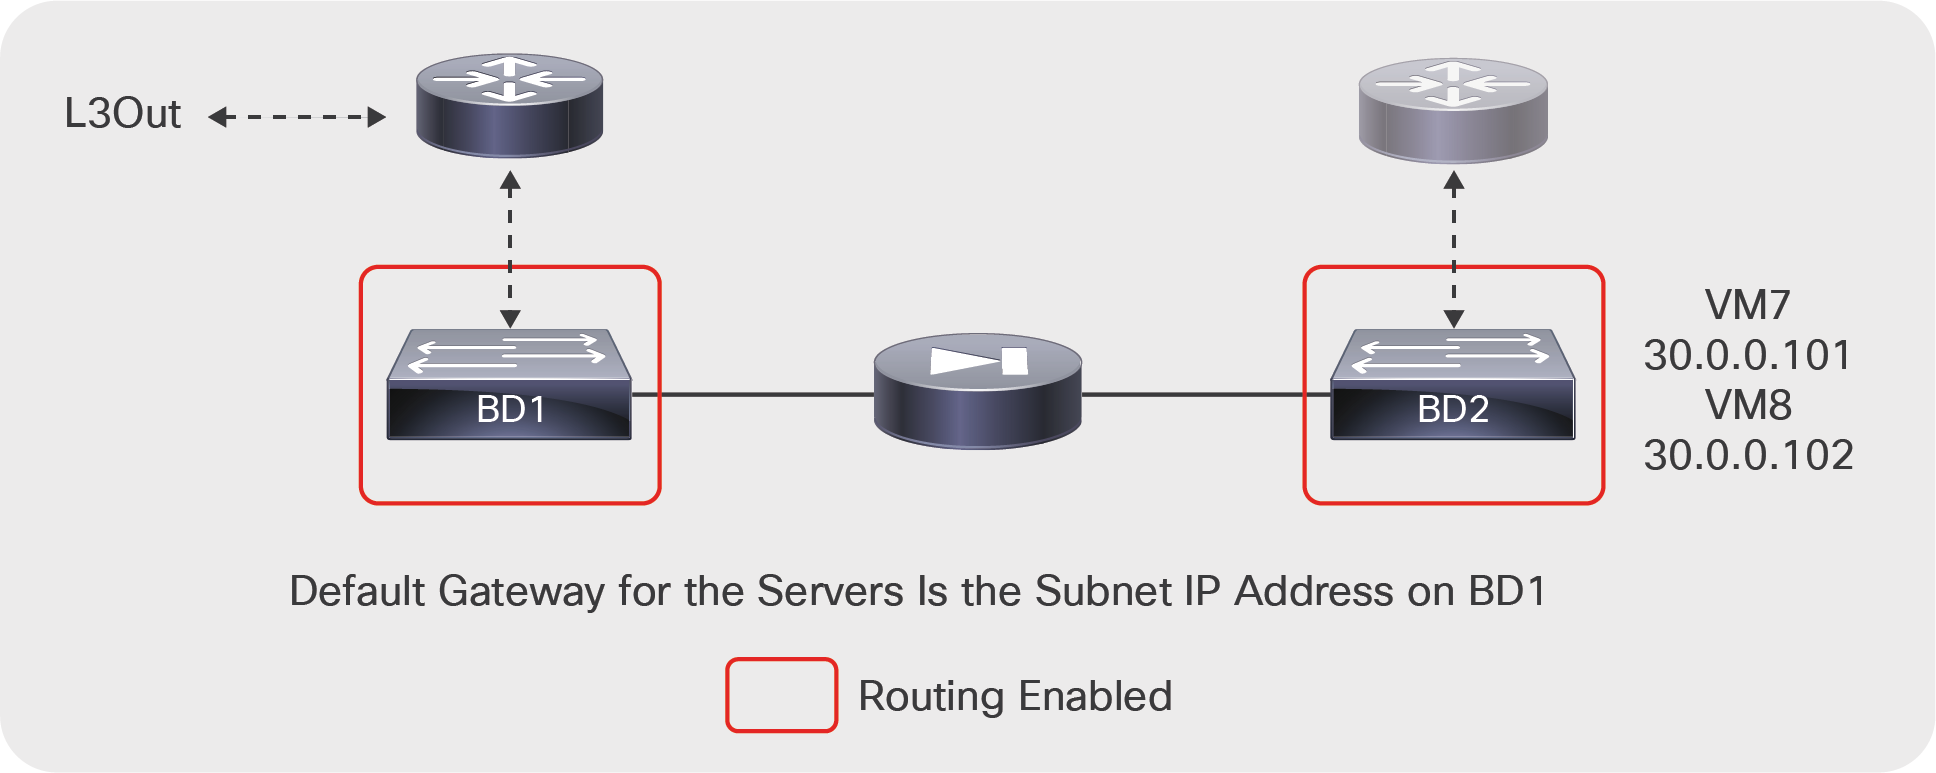 In this theoretical design, with a Go-Through device placed between two bridge domains that have routing enabled, you would have to create two separate VRF instances to avoid confusing the endpoint database